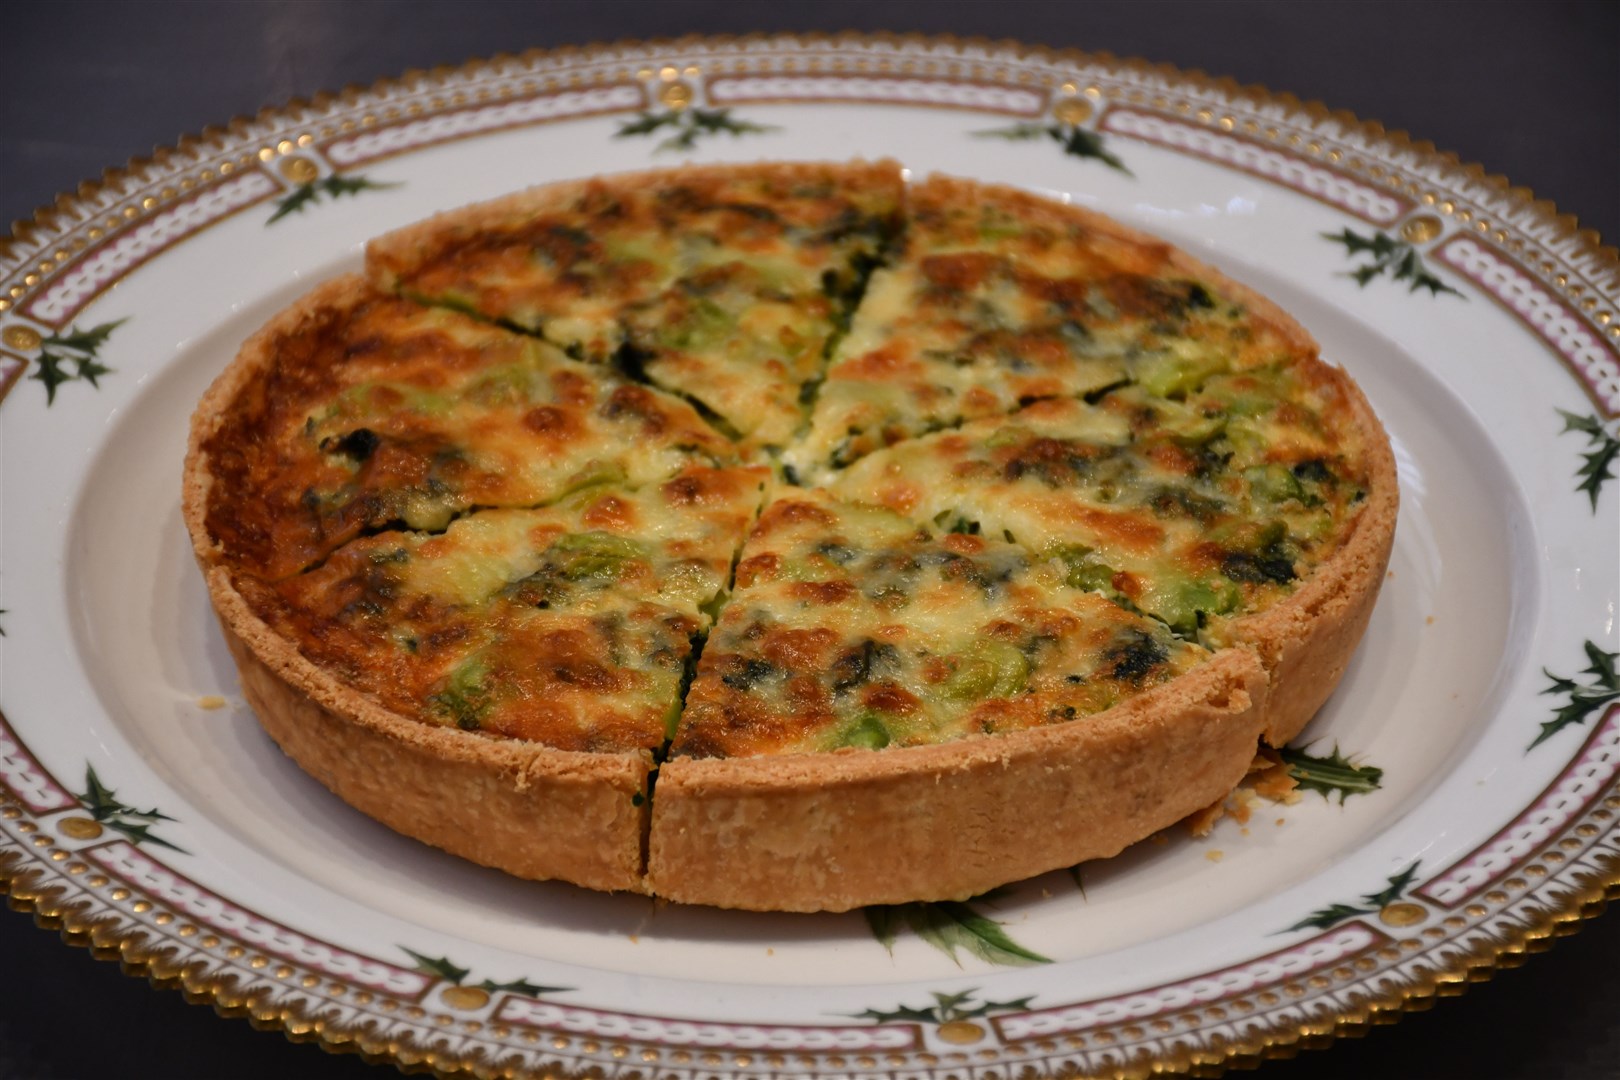 A Coronation Quiche is the dish chosen by the King and the Queen Consort (Buckingham Palace/PA)